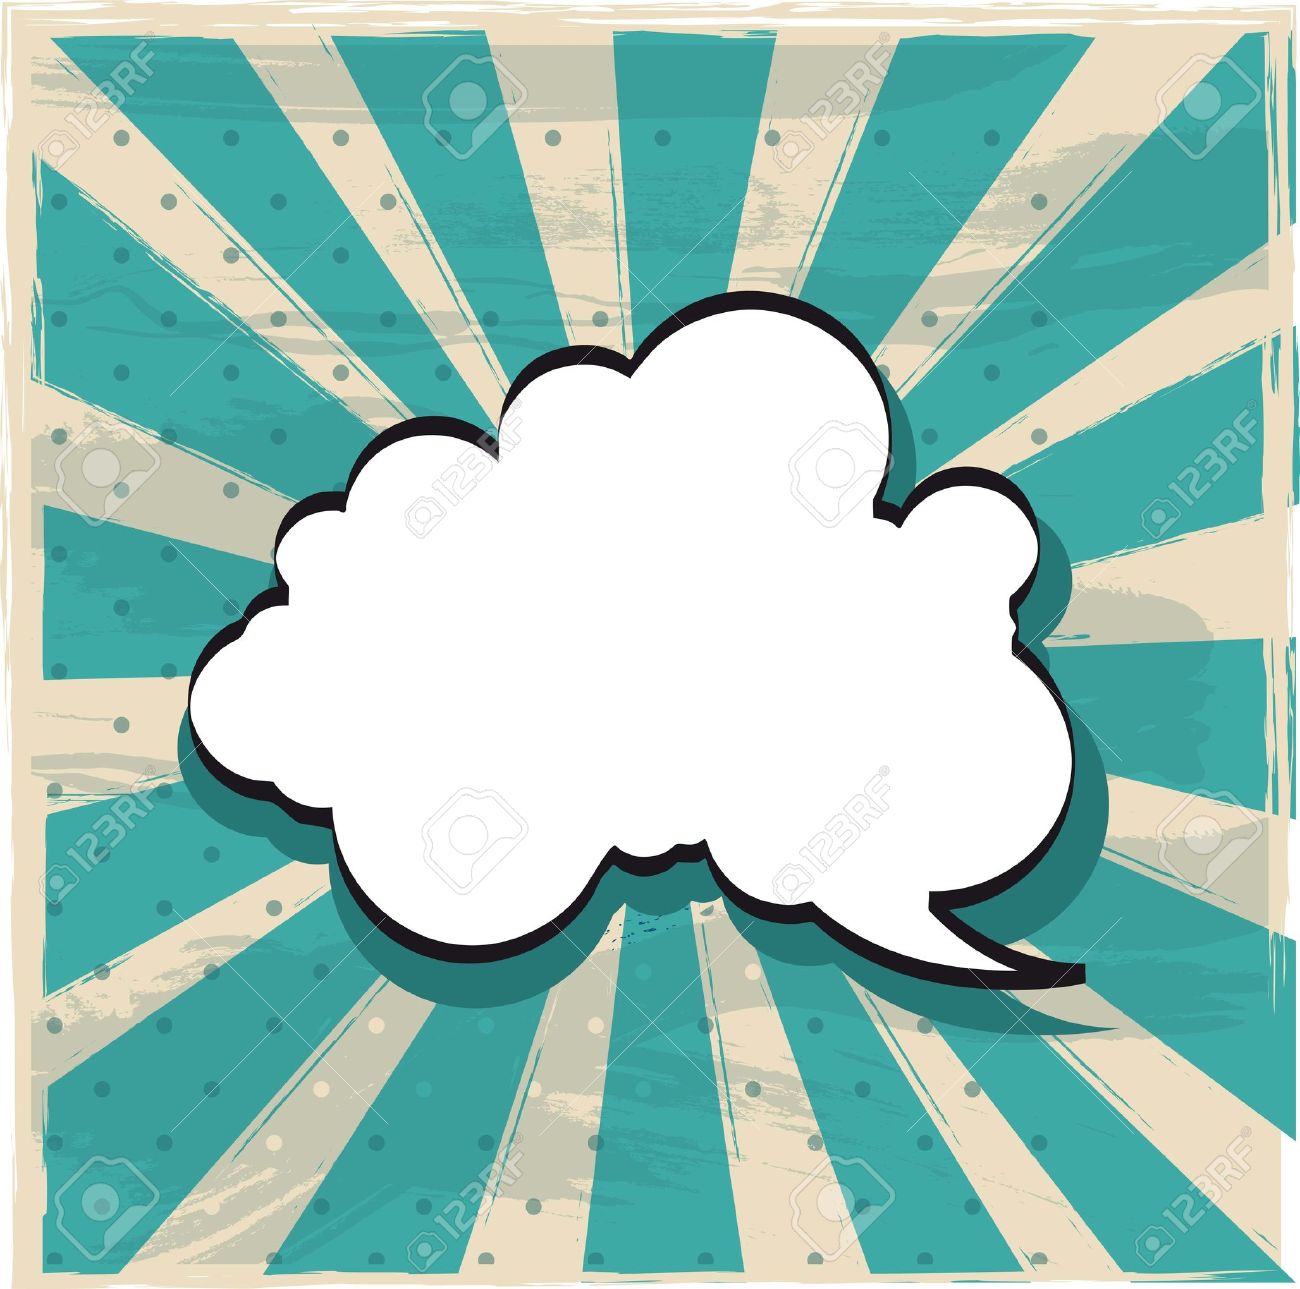 Cloud Of Thought Over Vintage Background Vector Illustration